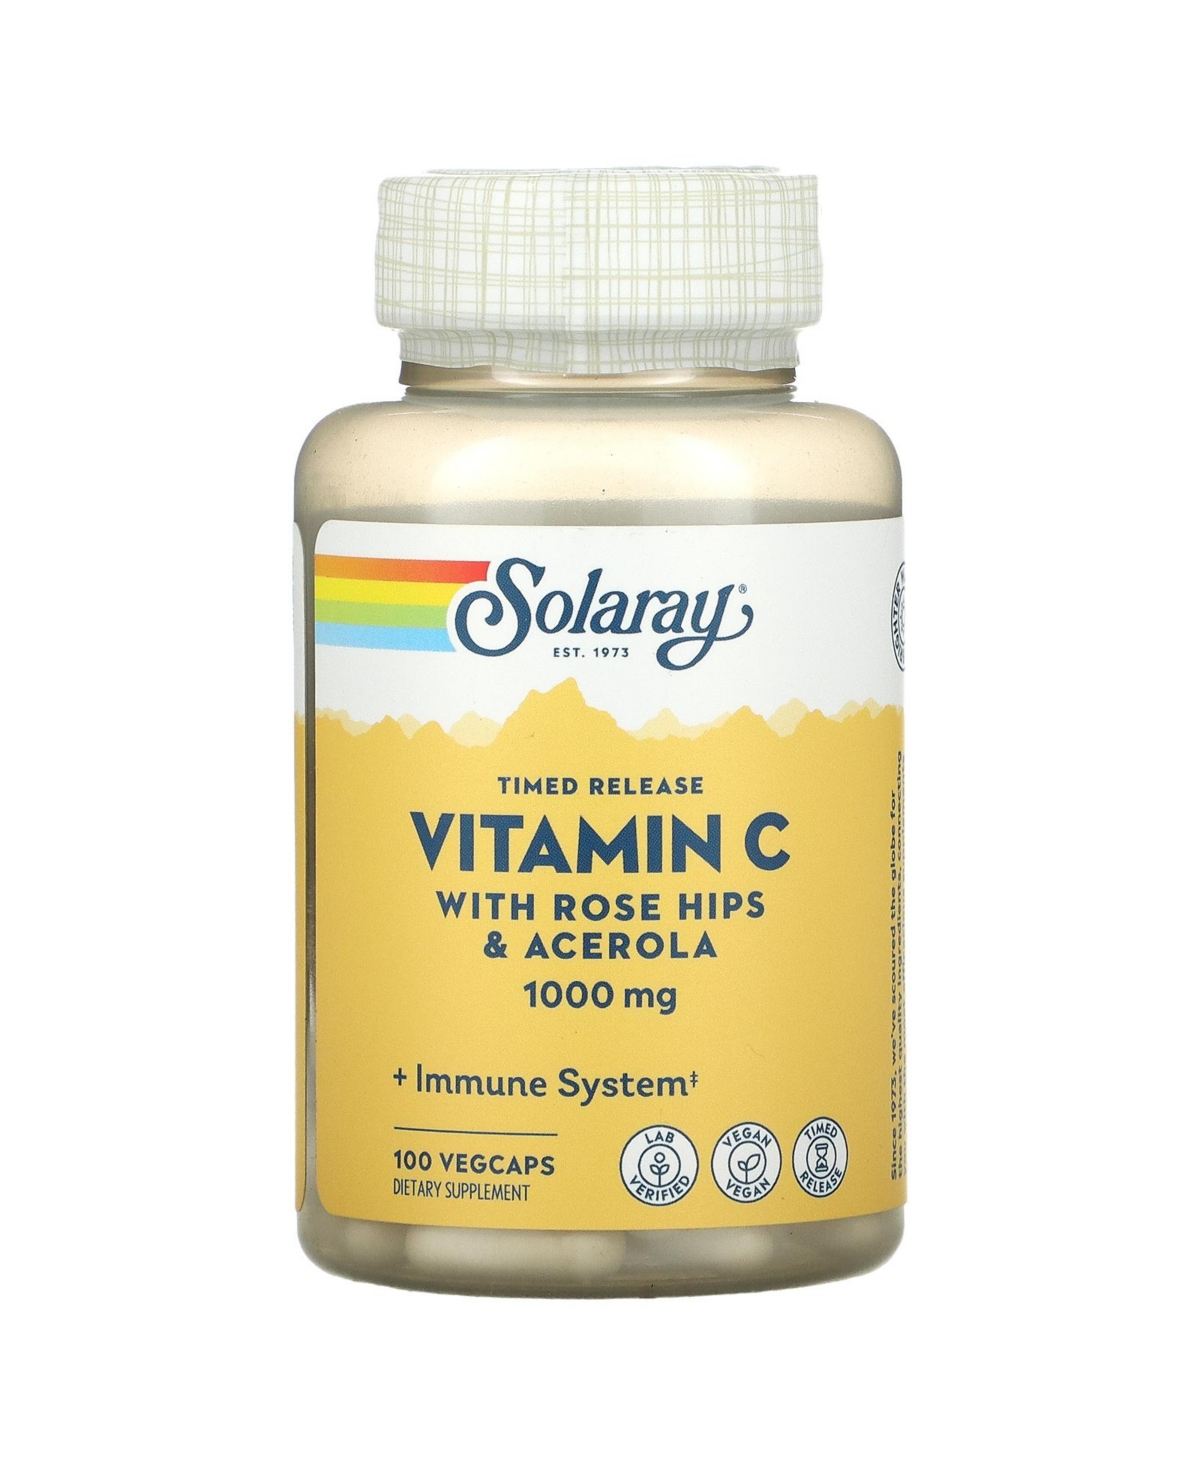 Timed Release Vitamin C with Rose Hips & Acerola 1 000 mg - 100 Veg Caps - Assorted Pre-Pack